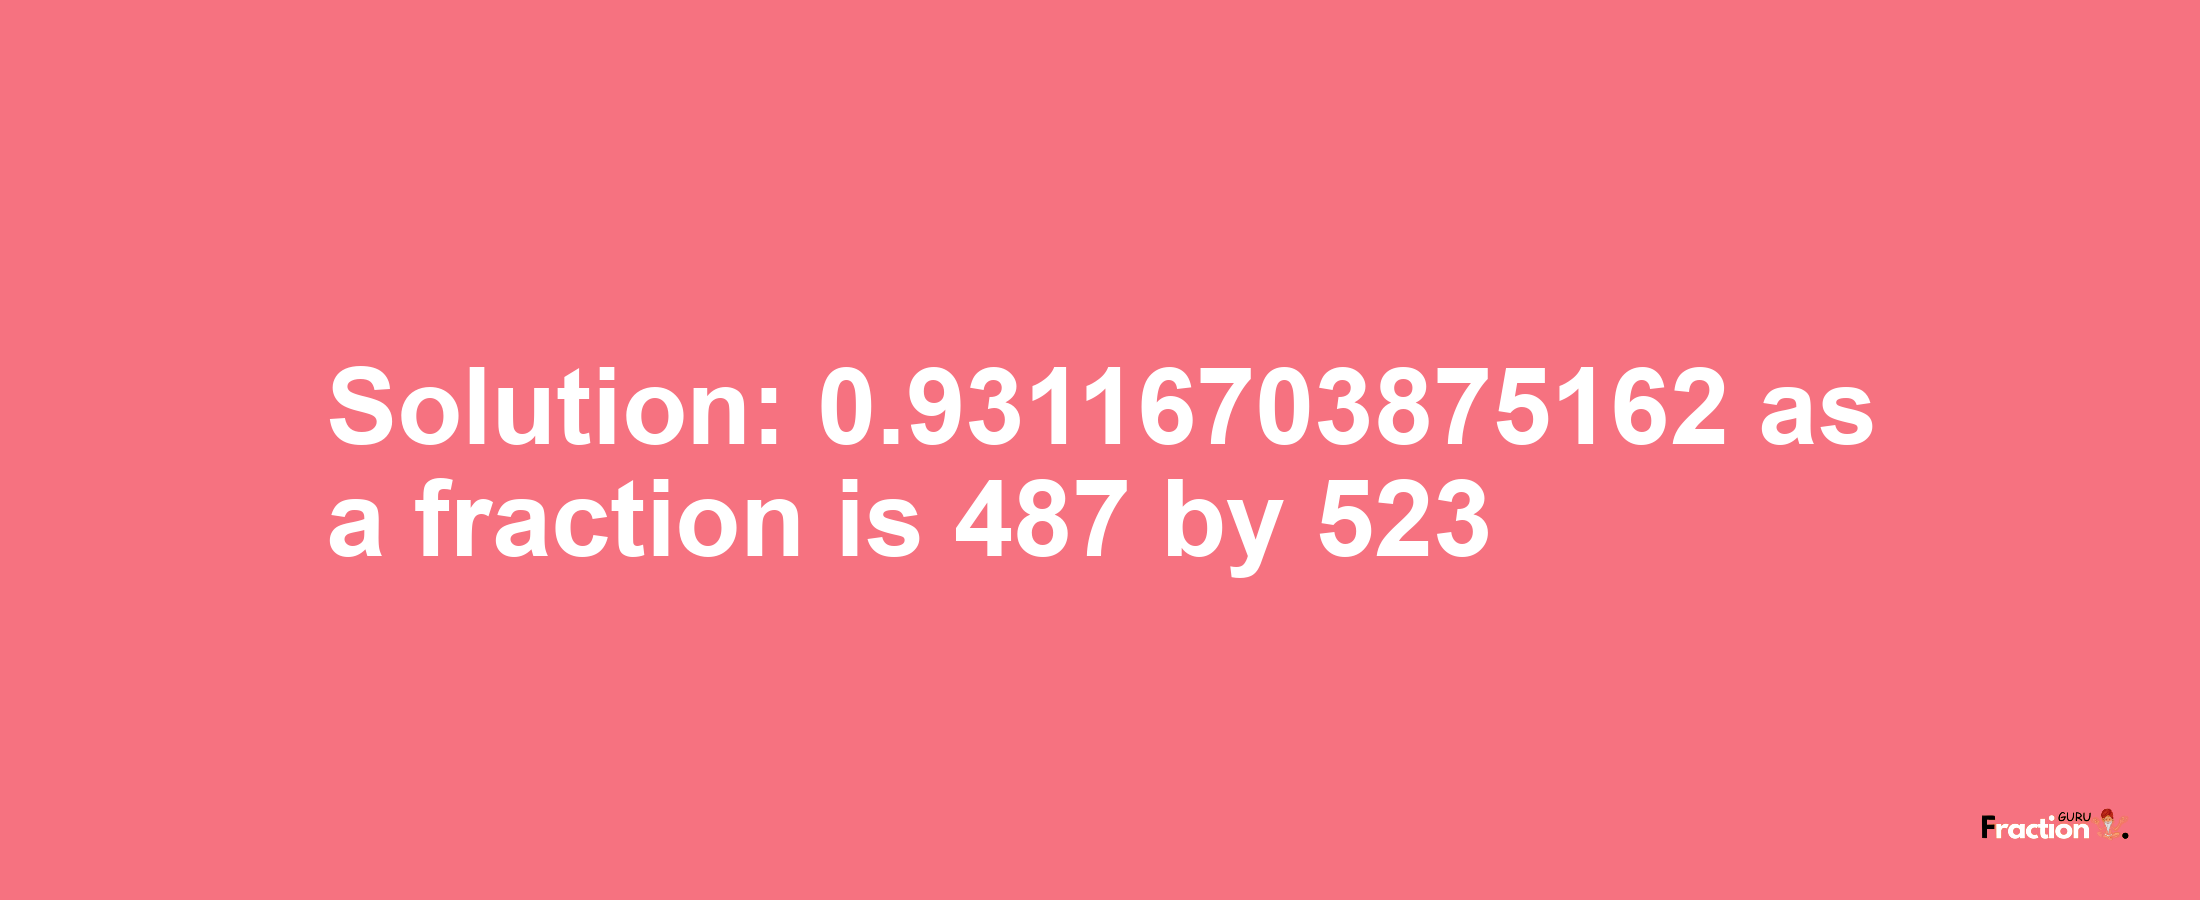 Solution:0.93116703875162 as a fraction is 487/523